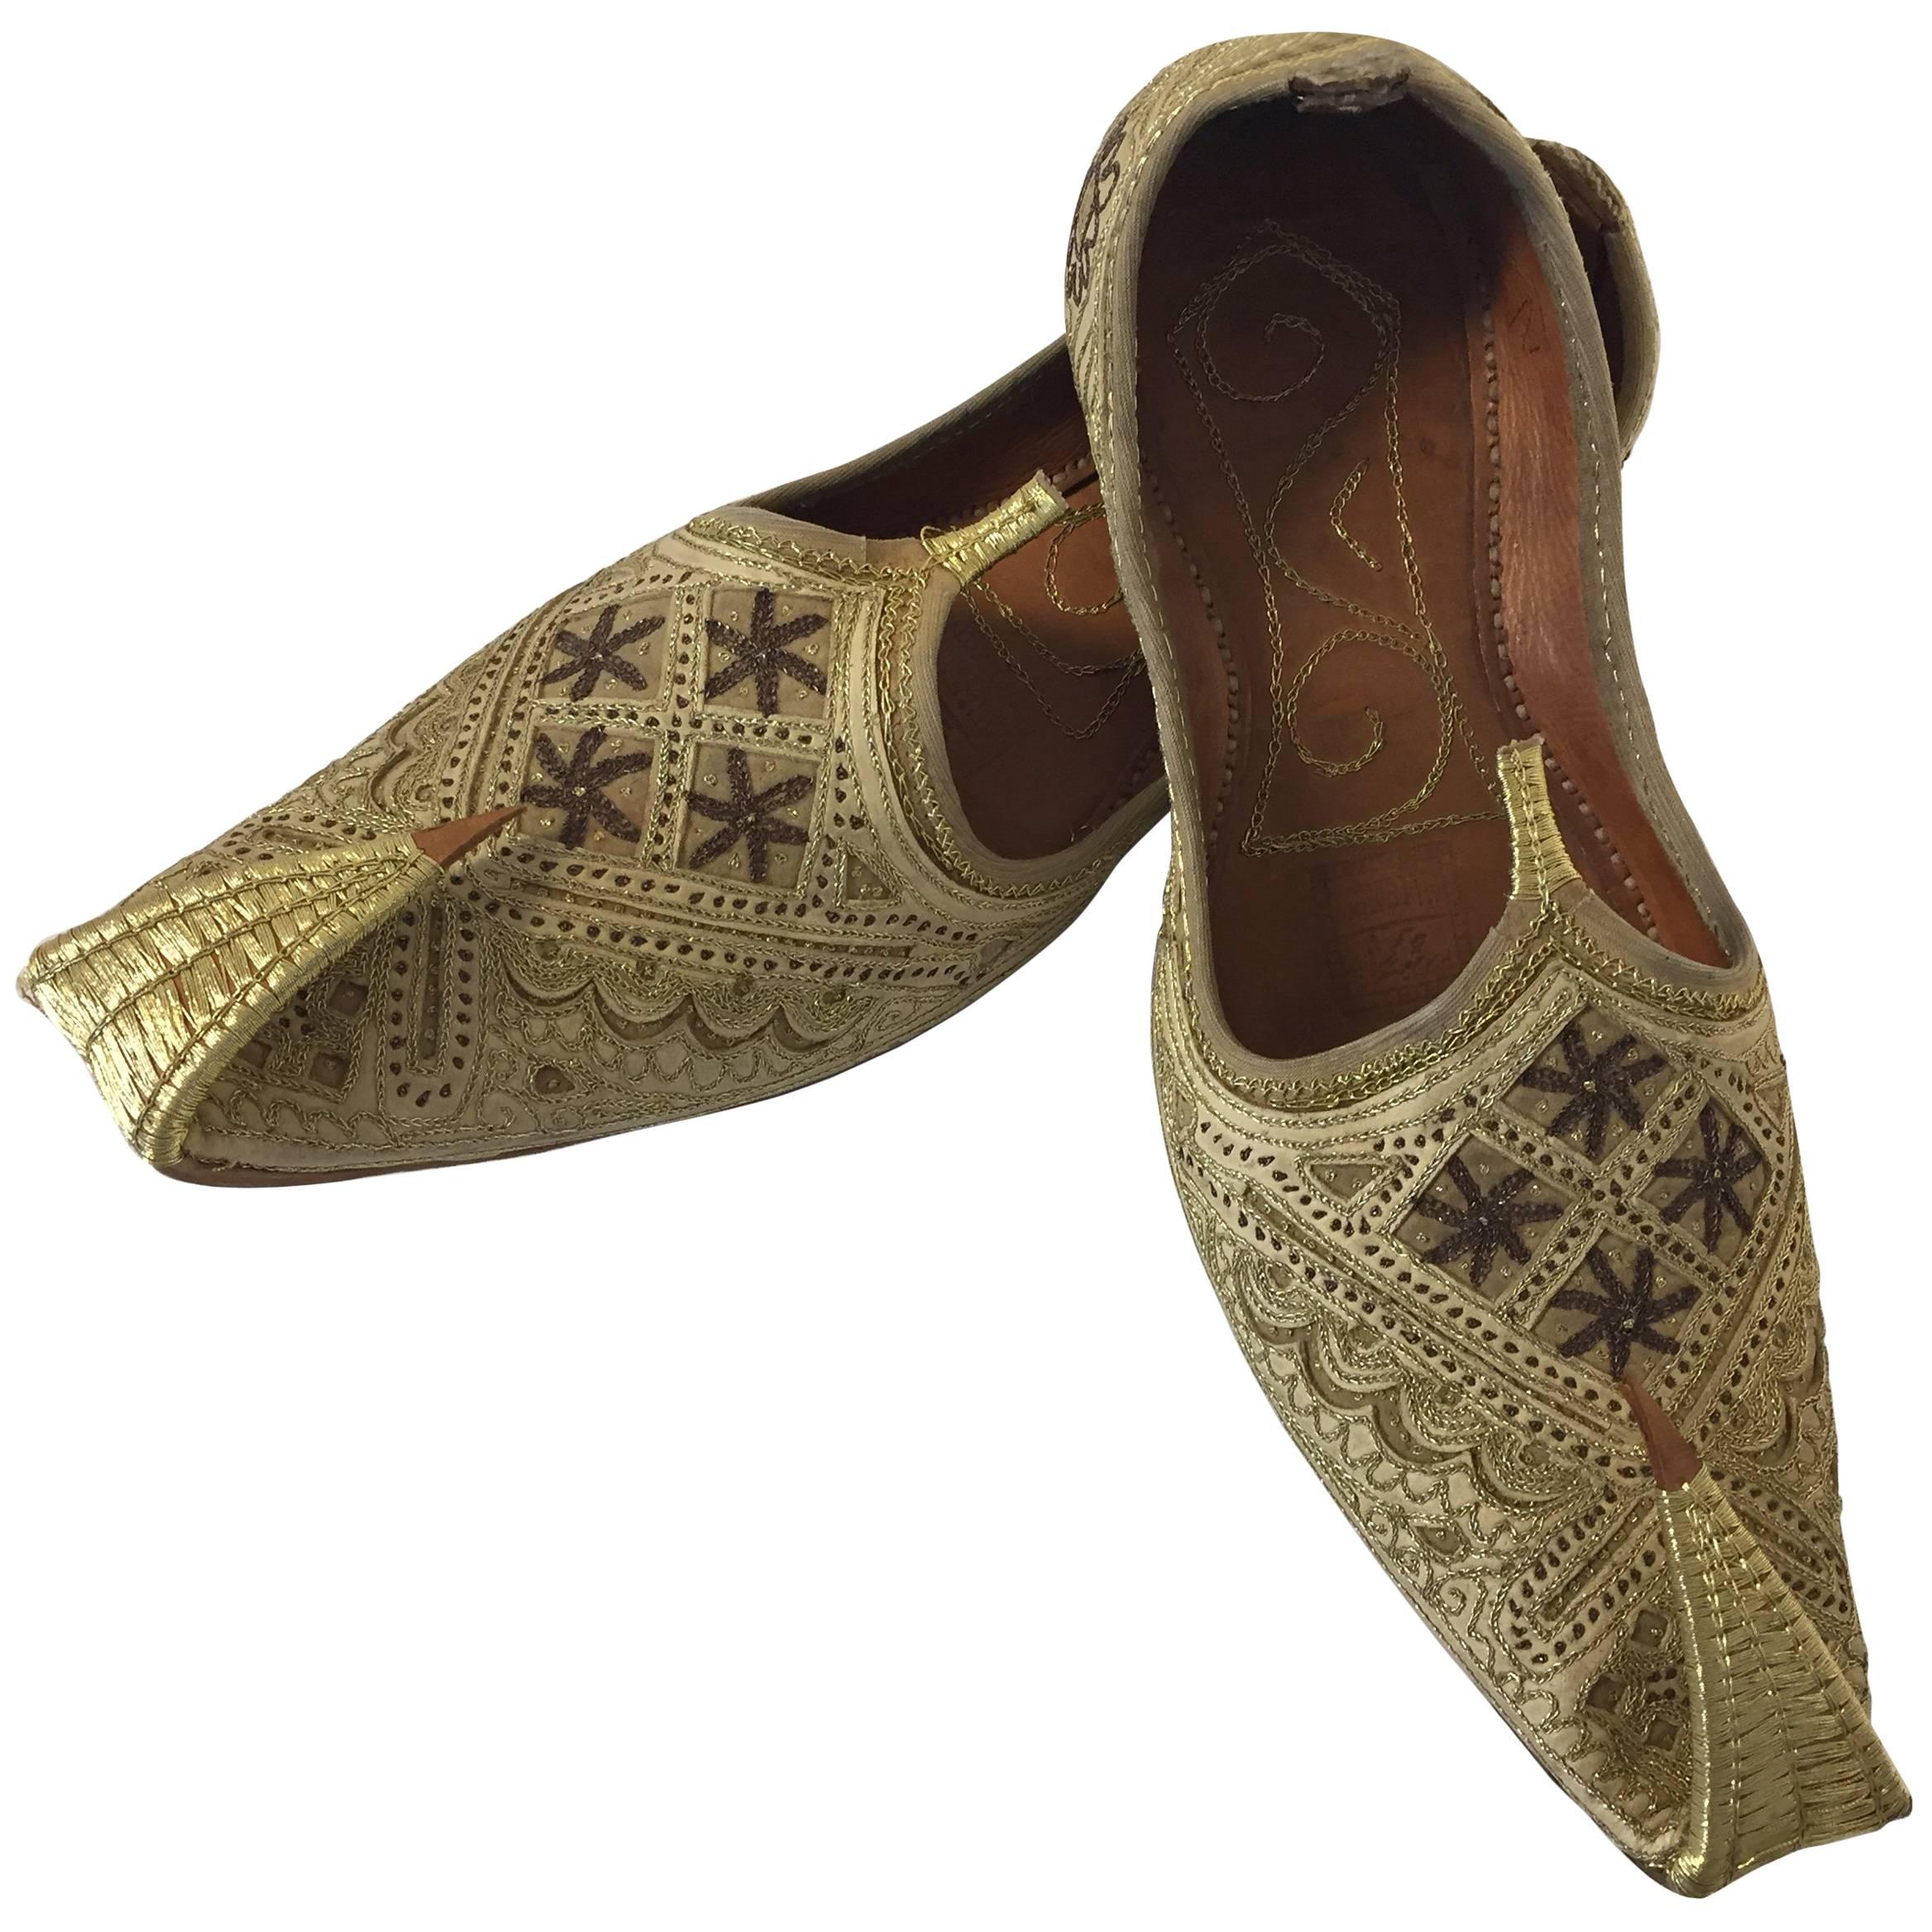 Handcrafted Moorish Arabian Embroidered Slippers Shoes